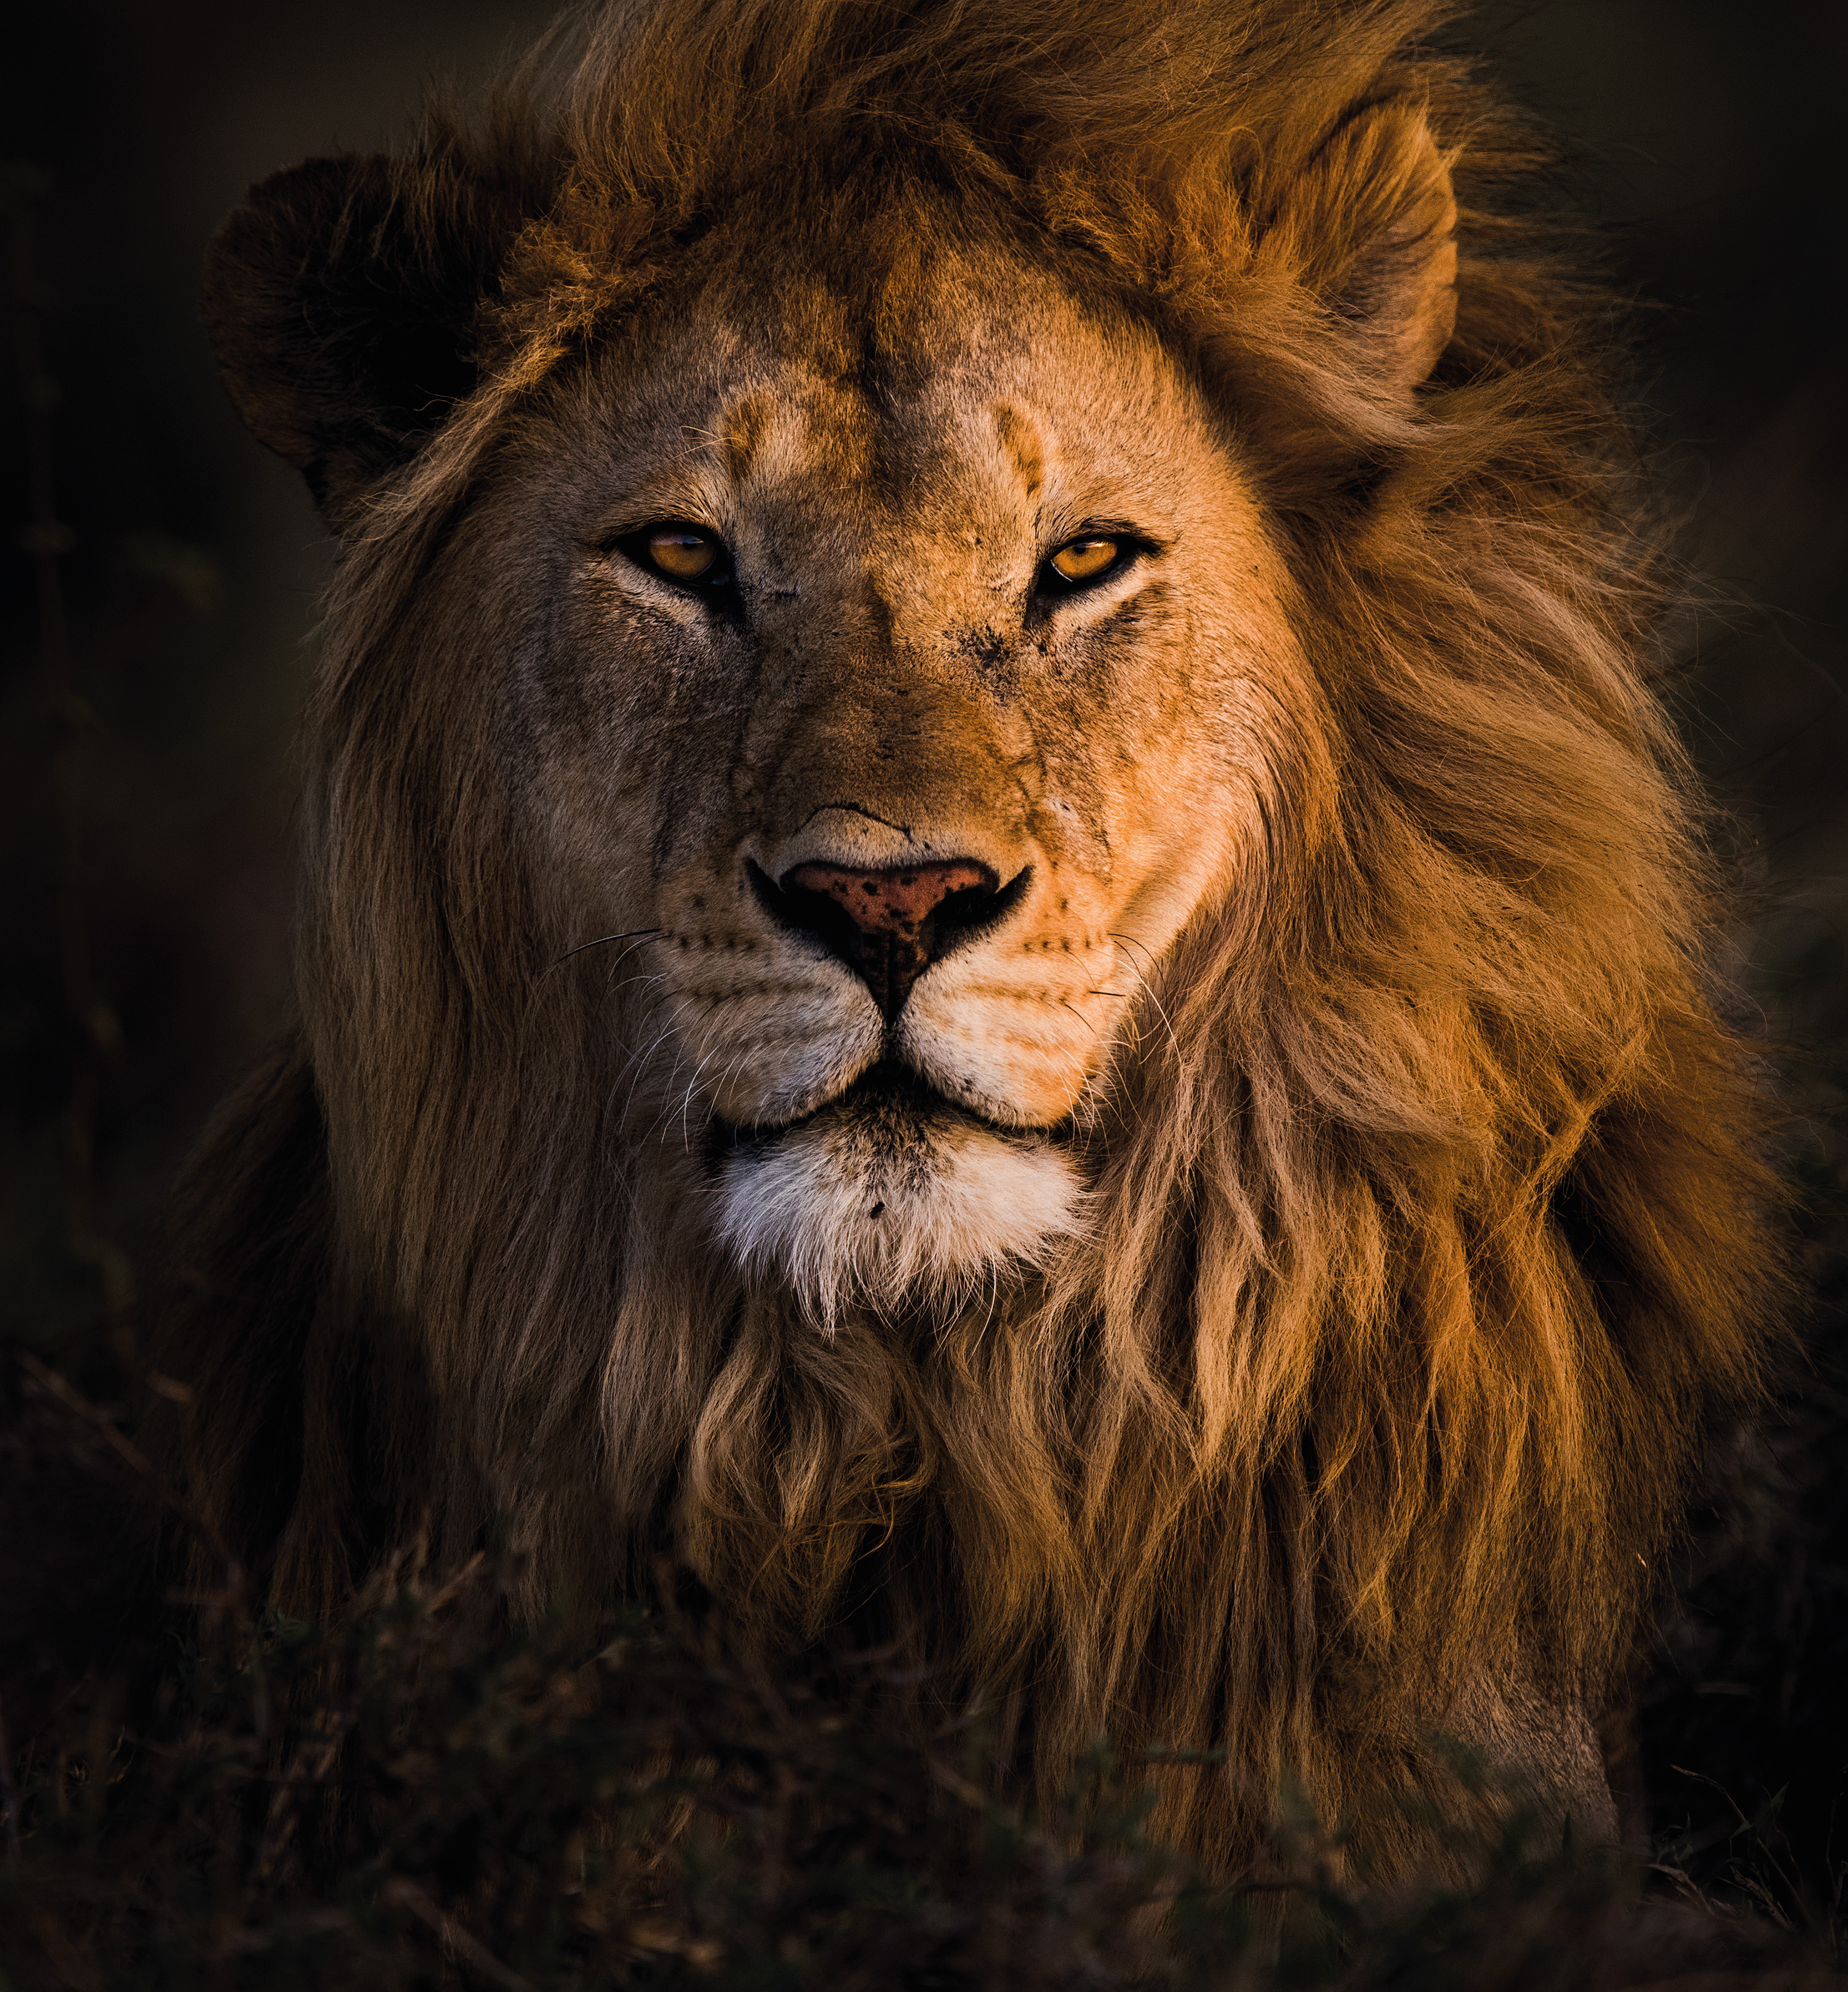 Remembering Lions: beautiful photographs of this majestic cat